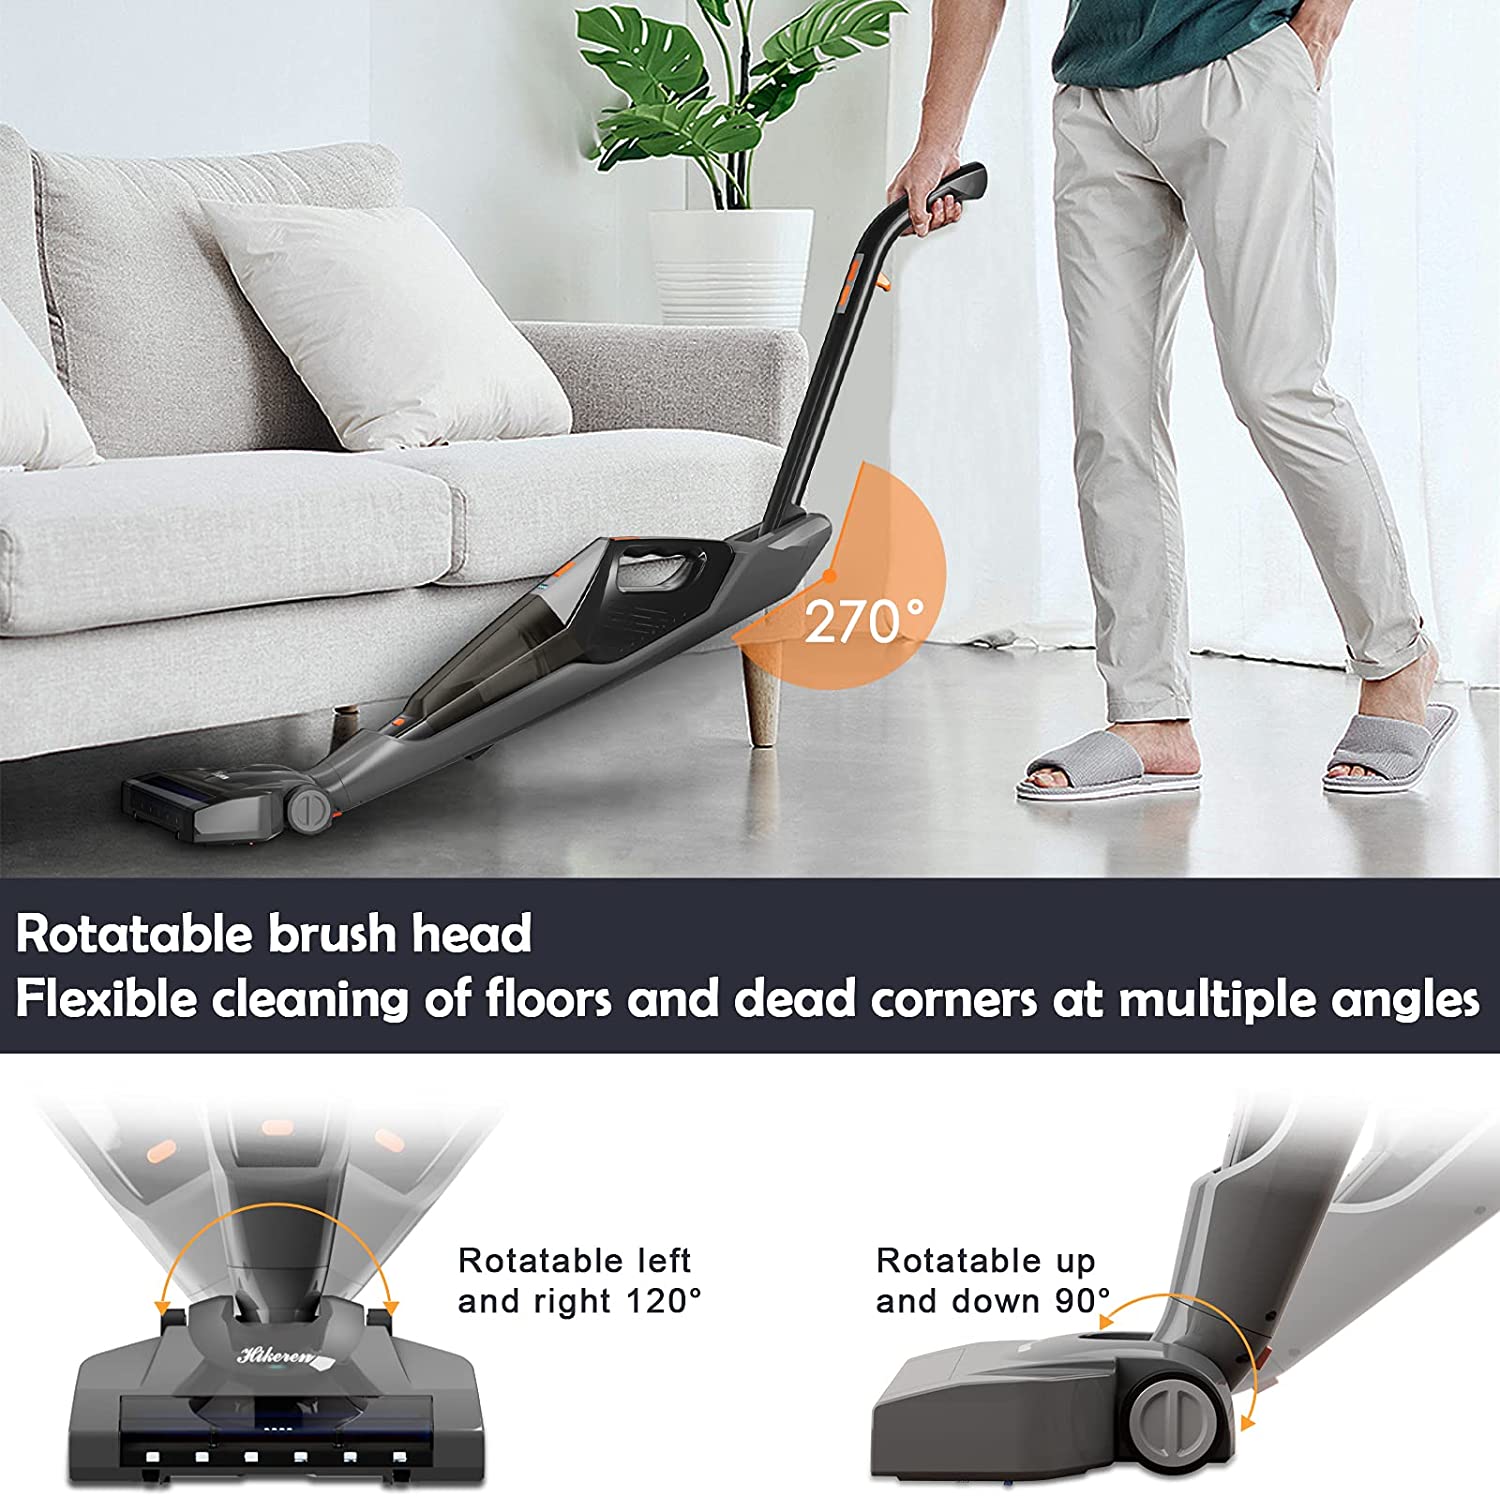 Wet Dry Cordless-Vacuum Cleaner-Lightweight-Powerful Floor-Cleaning - 2 in 1/ 16Kpa Handheld Vacuum with Washable HEPA Filter Portable for Home,Pet Hair,Carpet